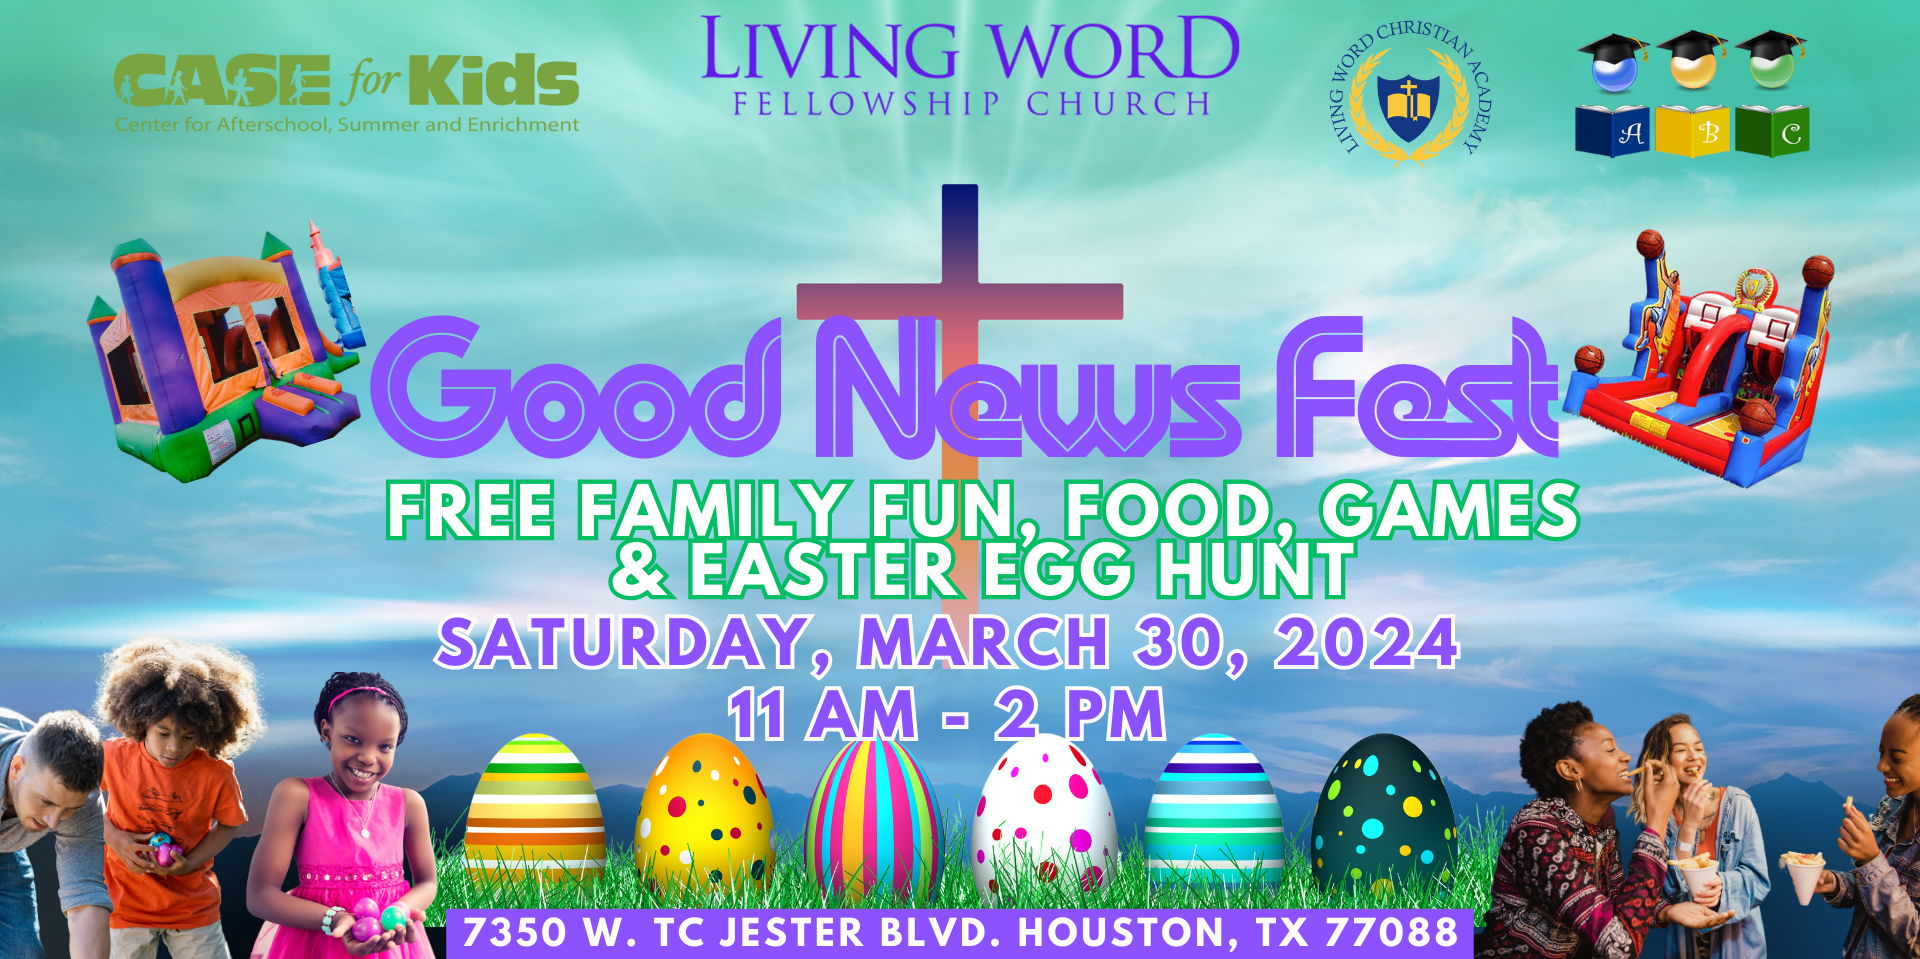 GOOD NEWS FESTIVAL - FREE FUN FOOD & GAMES & MUCH MORE FOR THE ENTIRE FAMILY promotional image